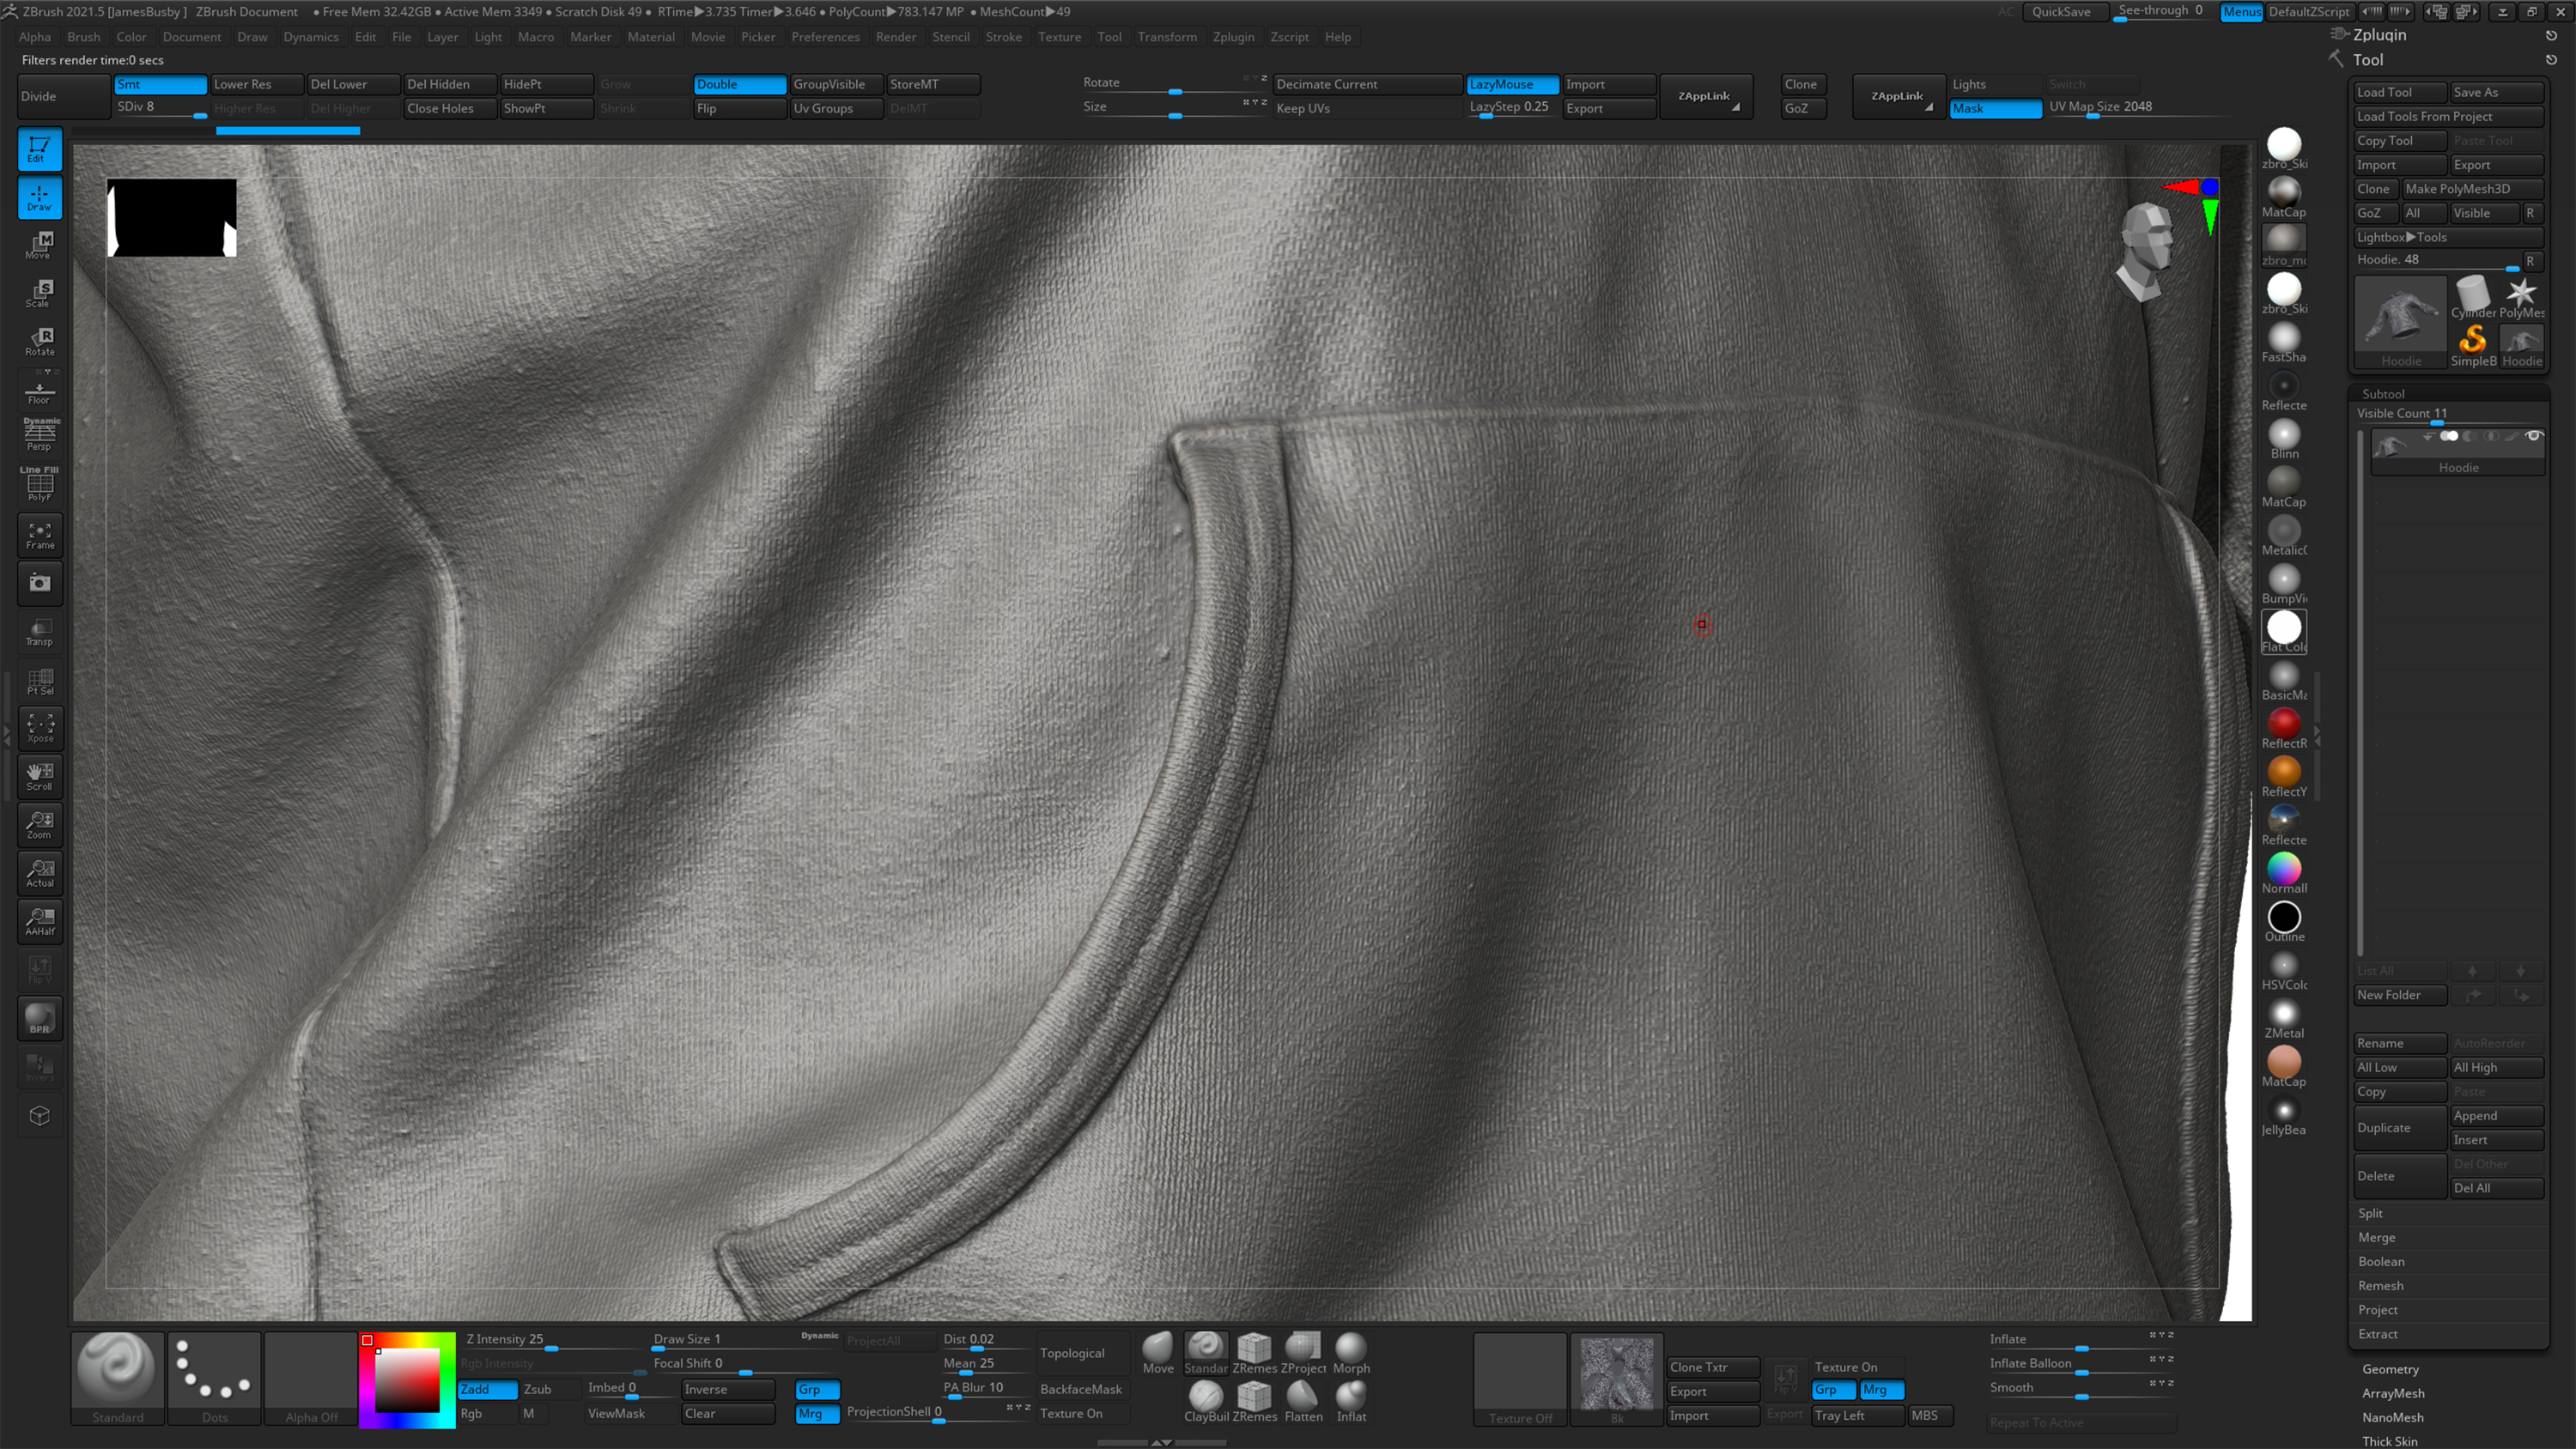 Wrinkles and folds in clothing 3d models sculpting